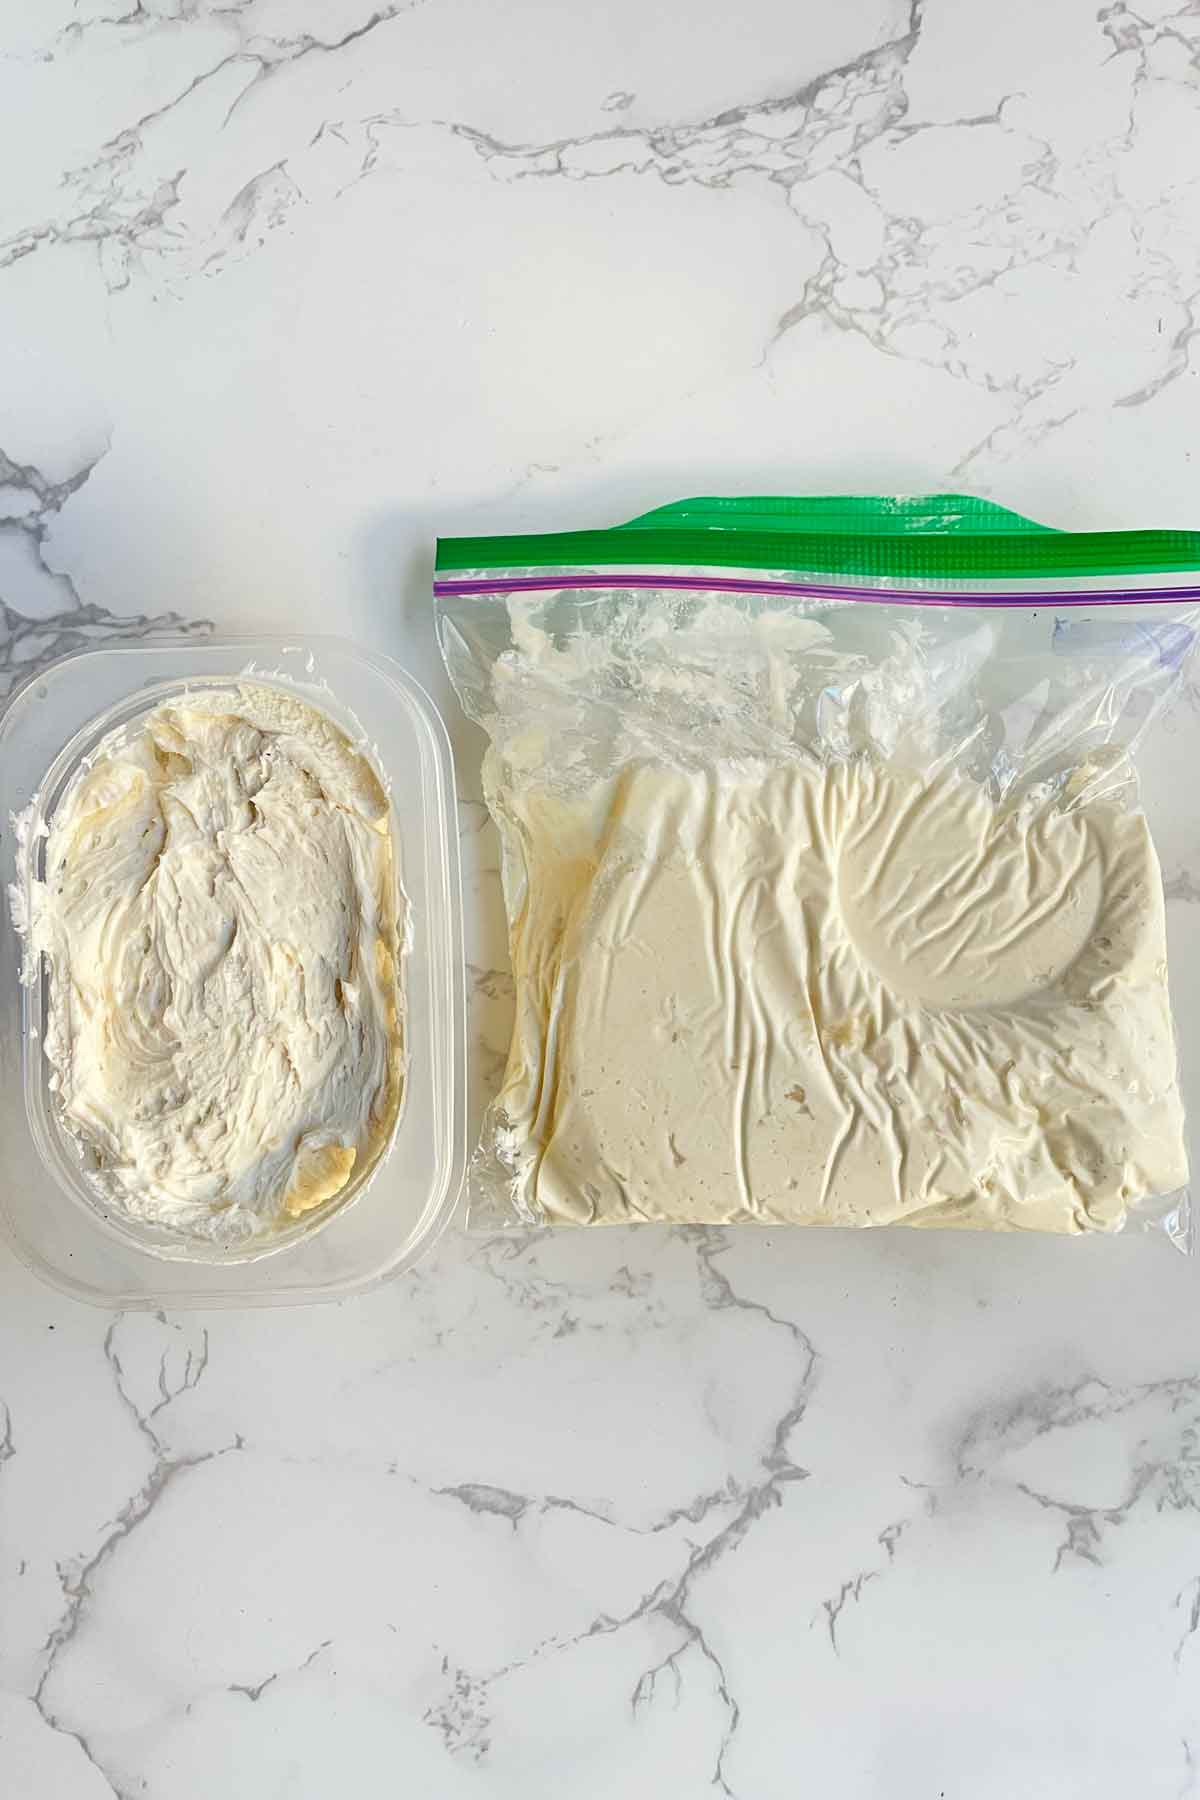 frozen buttercream frosting in a container and ziplock bag.